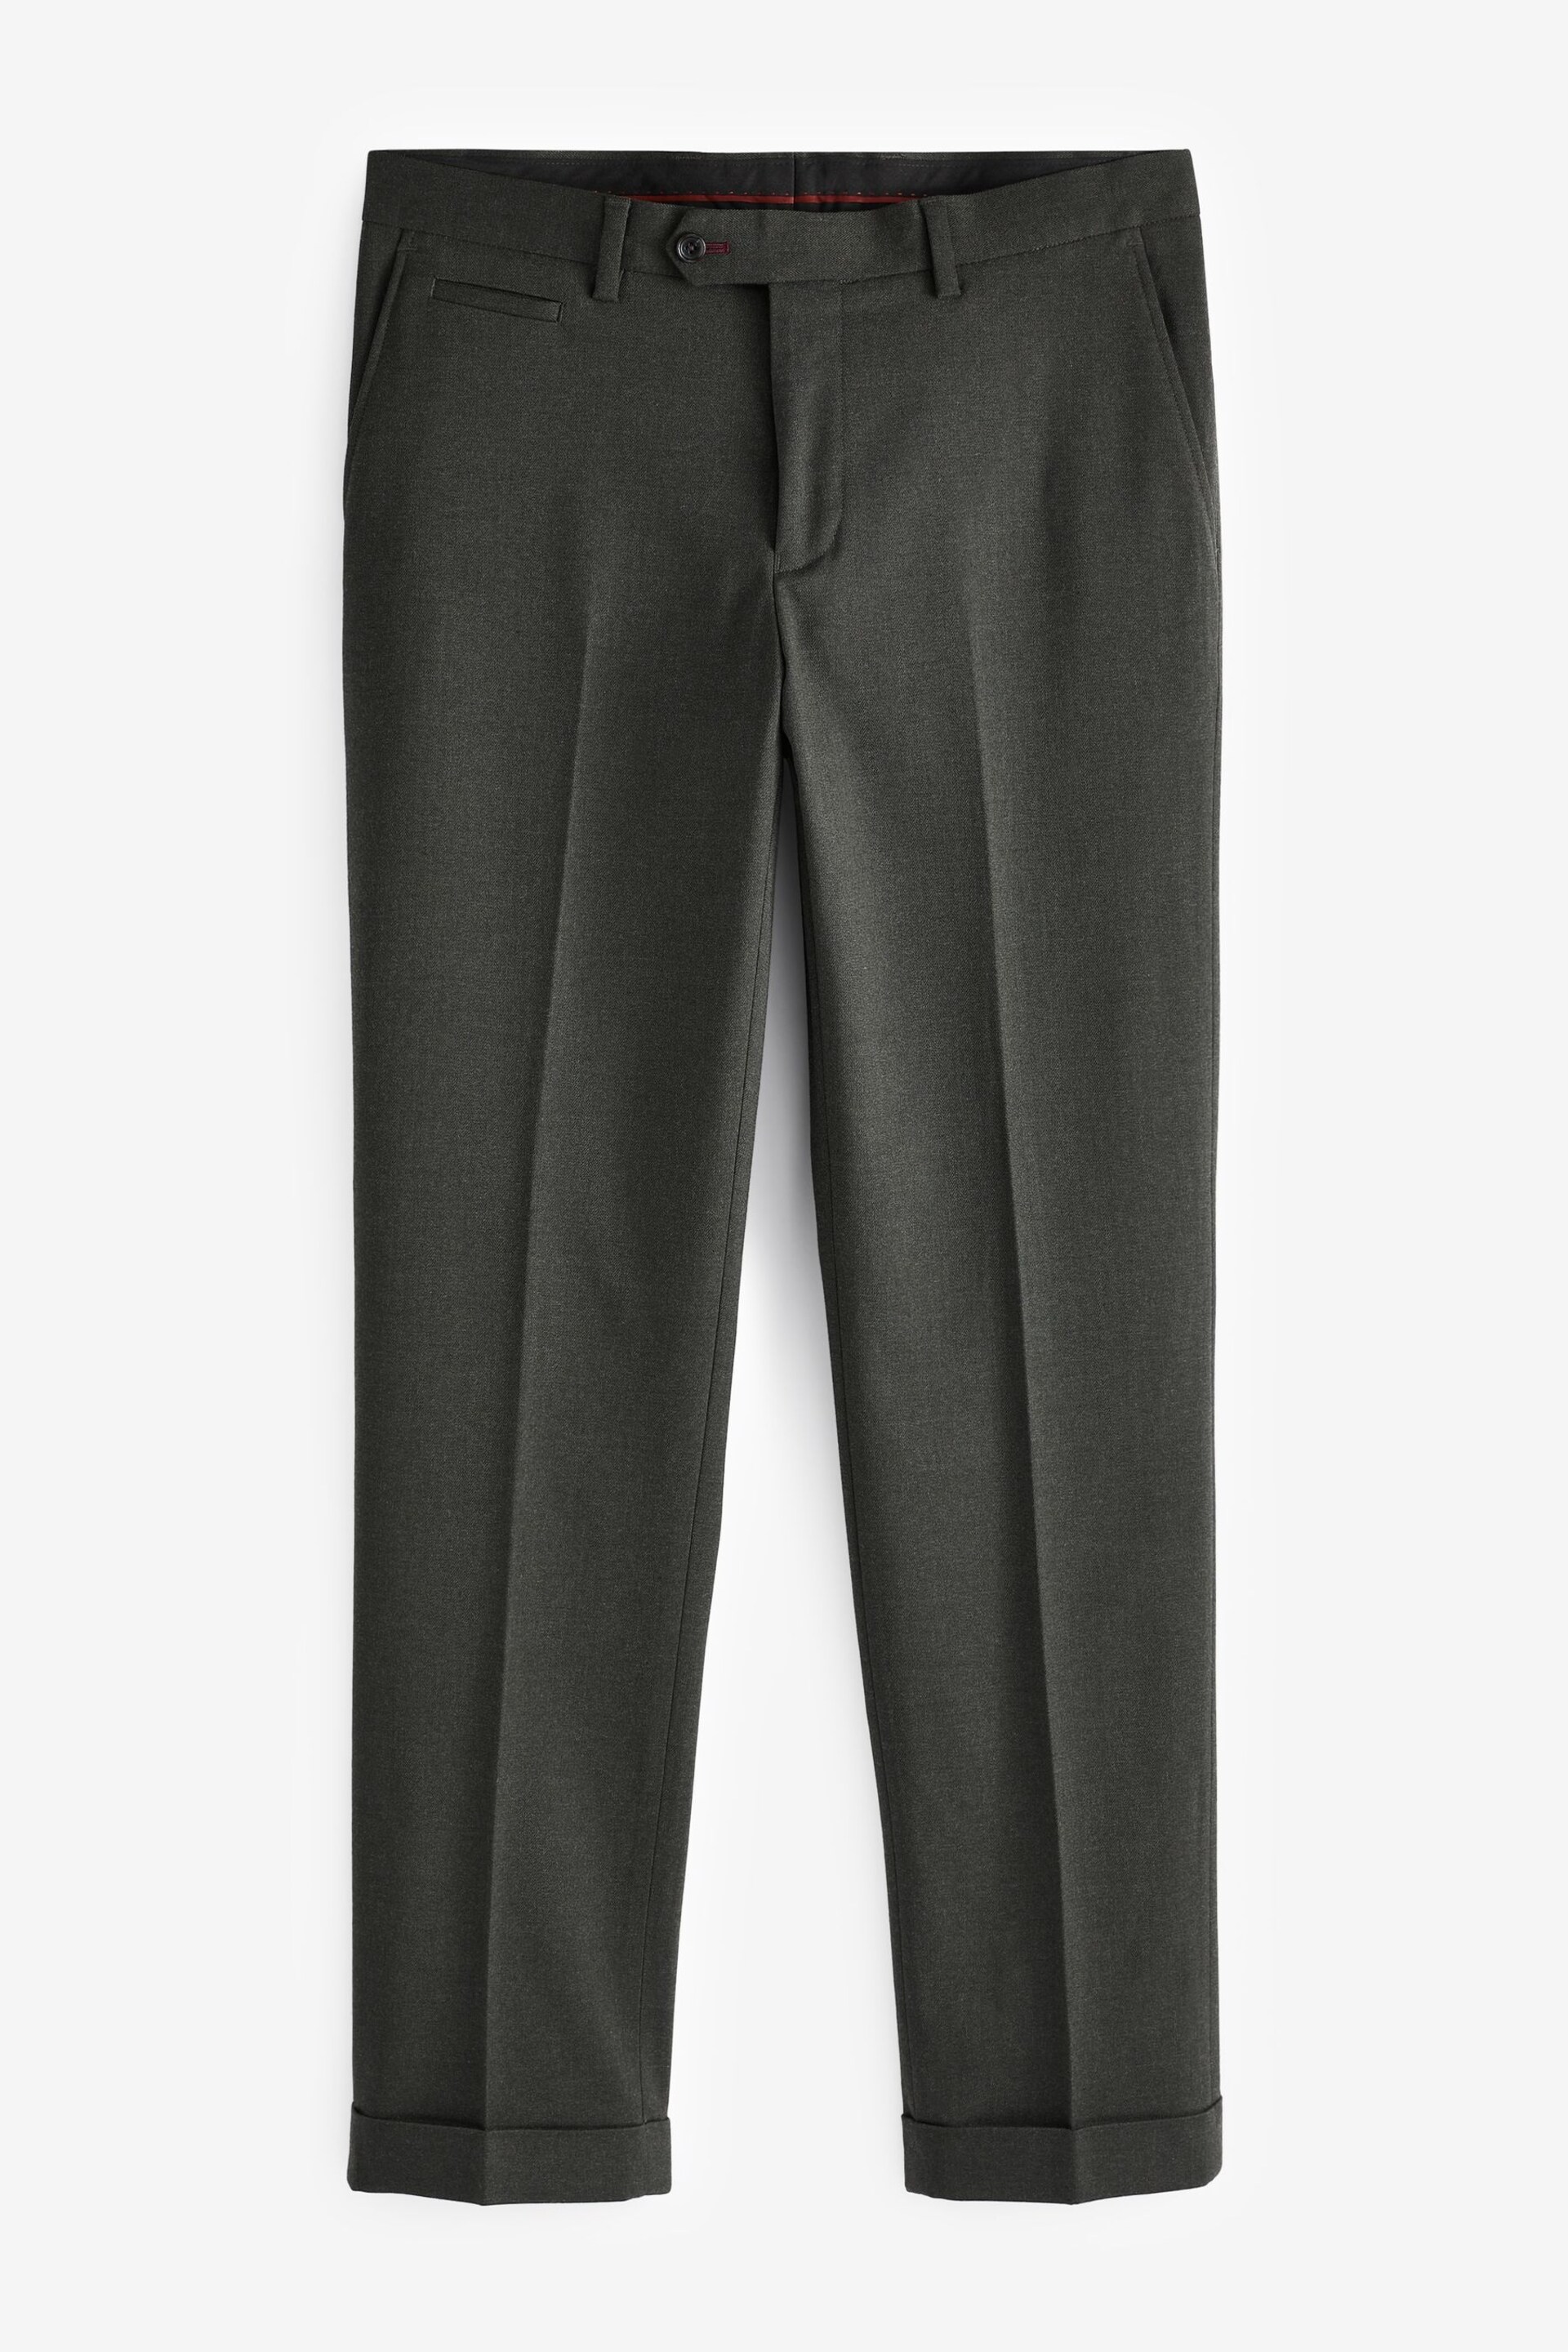 Green Tailored Tailored Herringbone Suit Trousers - Image 6 of 9